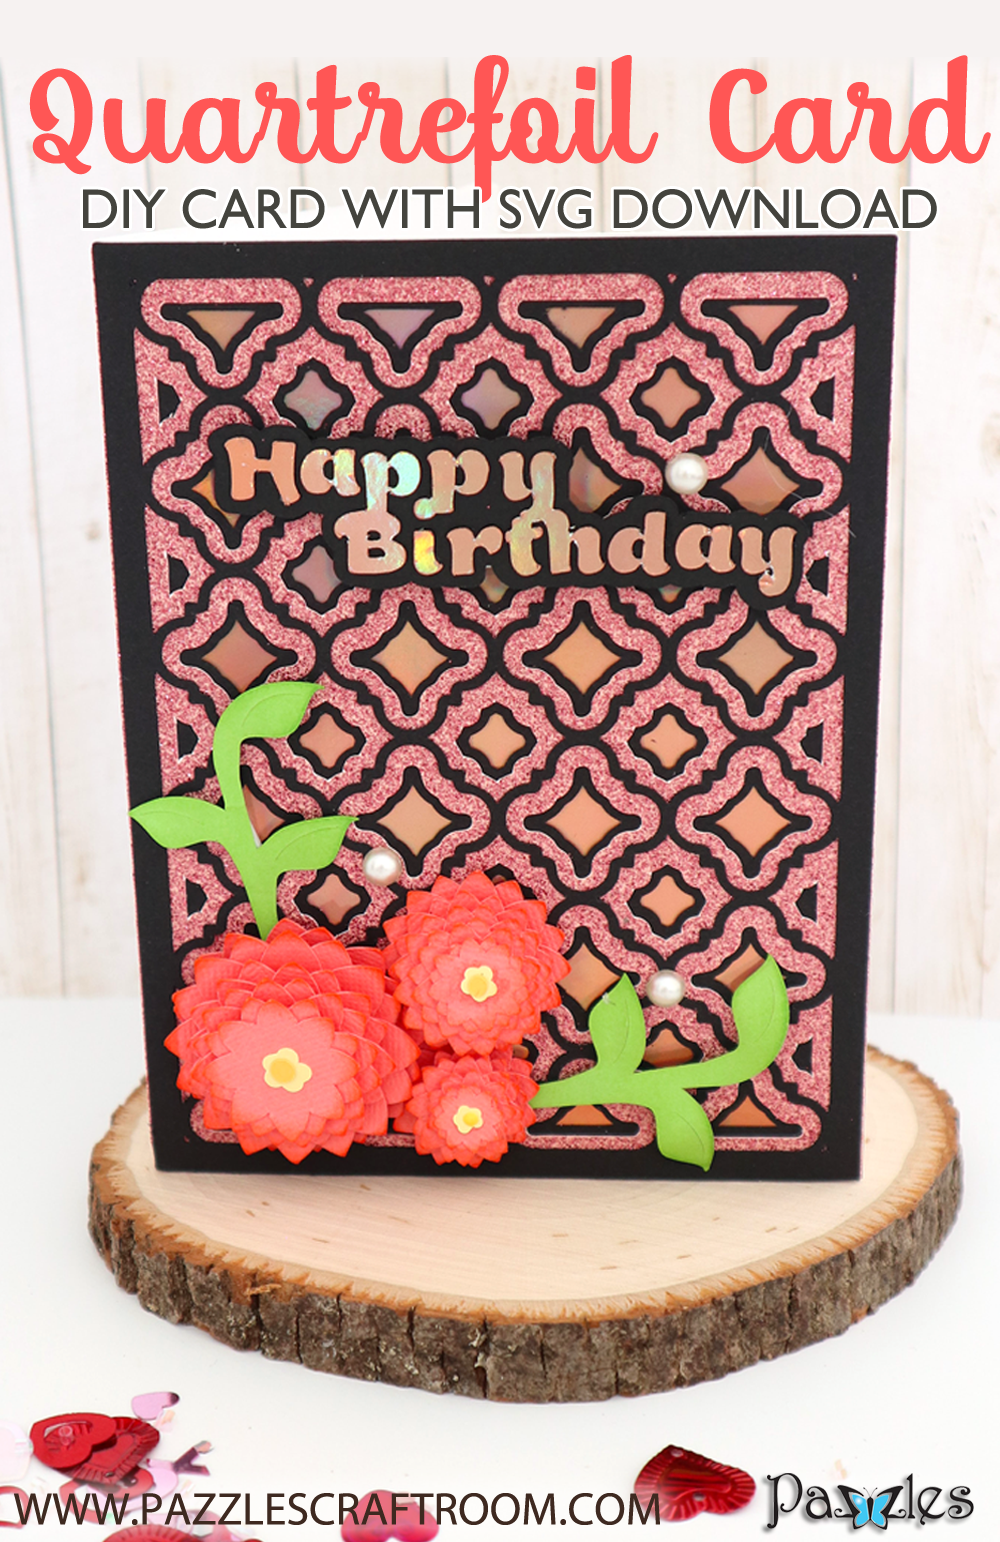 Pazzles Happy Birthday DIY Quartrefoil Layered Card with instant SVG download. Compatible with all major electronic cutters including Pazzles Inspiration, Cricut, and Silhouette Cameo. Design by Monica Martinez